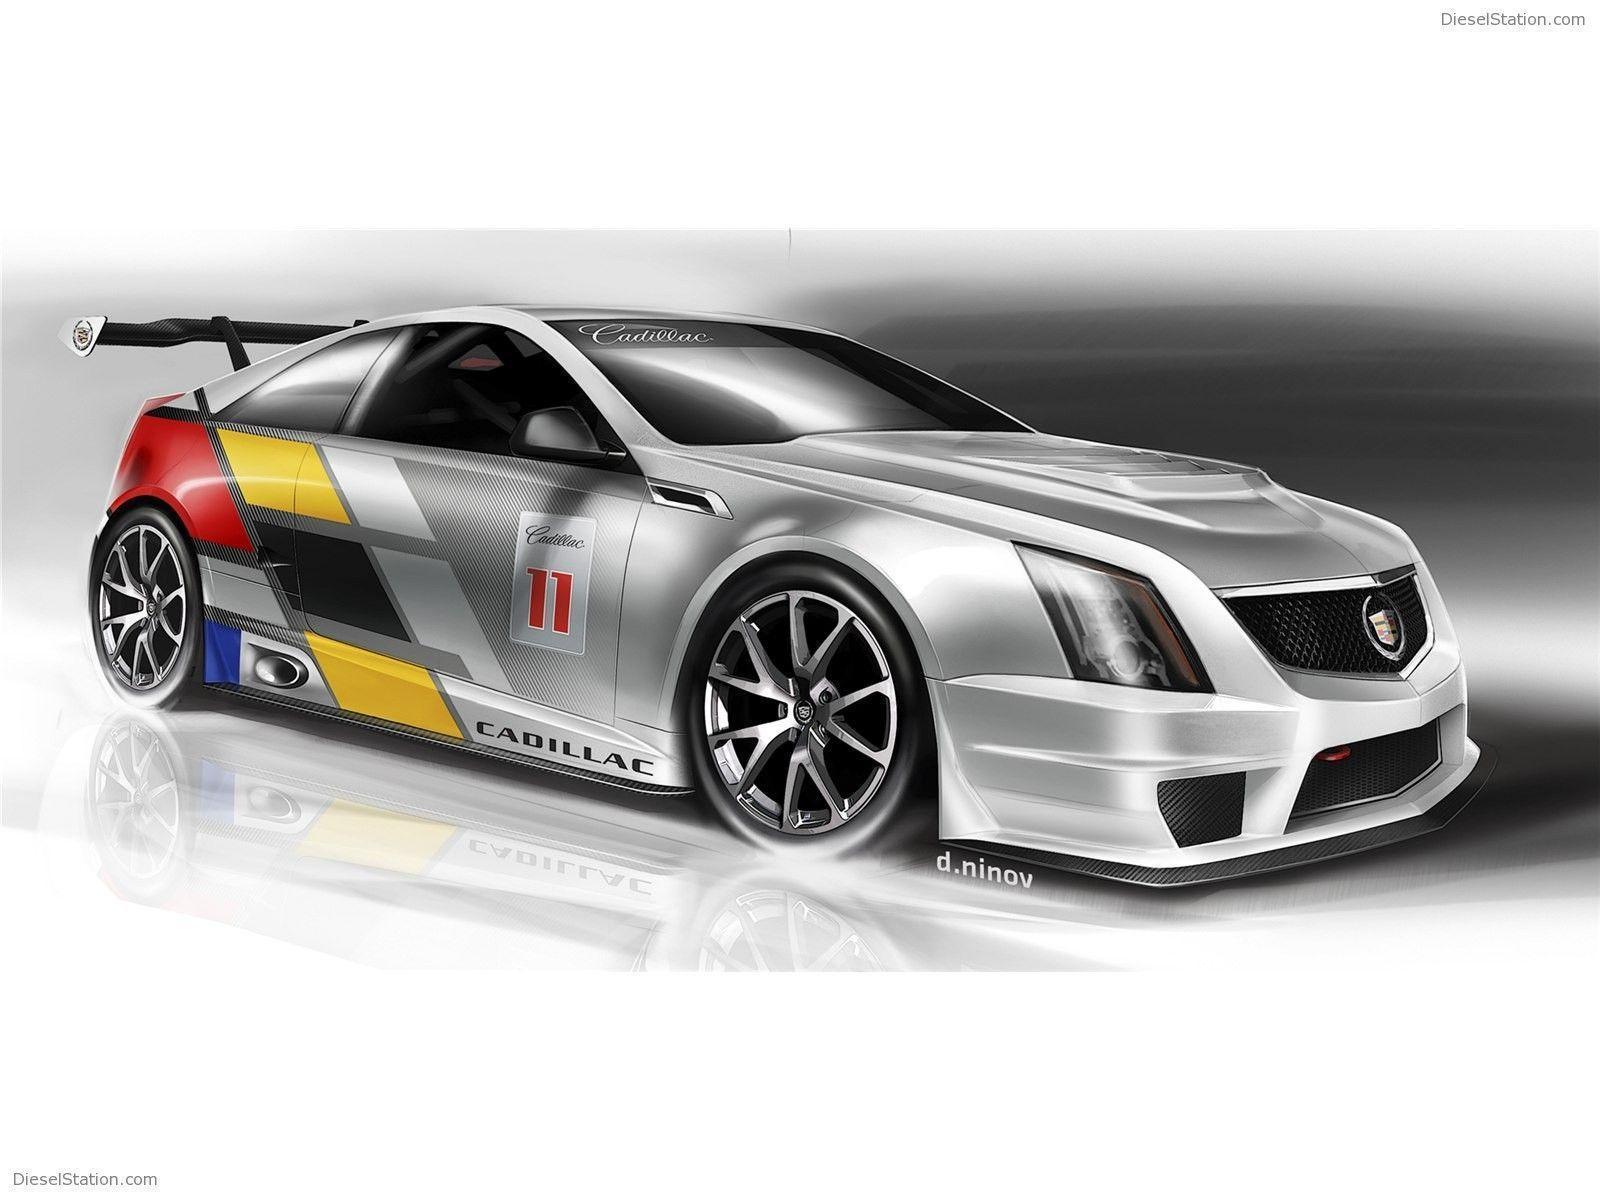 Cadillac CTS V Coupe Race Car Exotic Car Wallpaper of 6